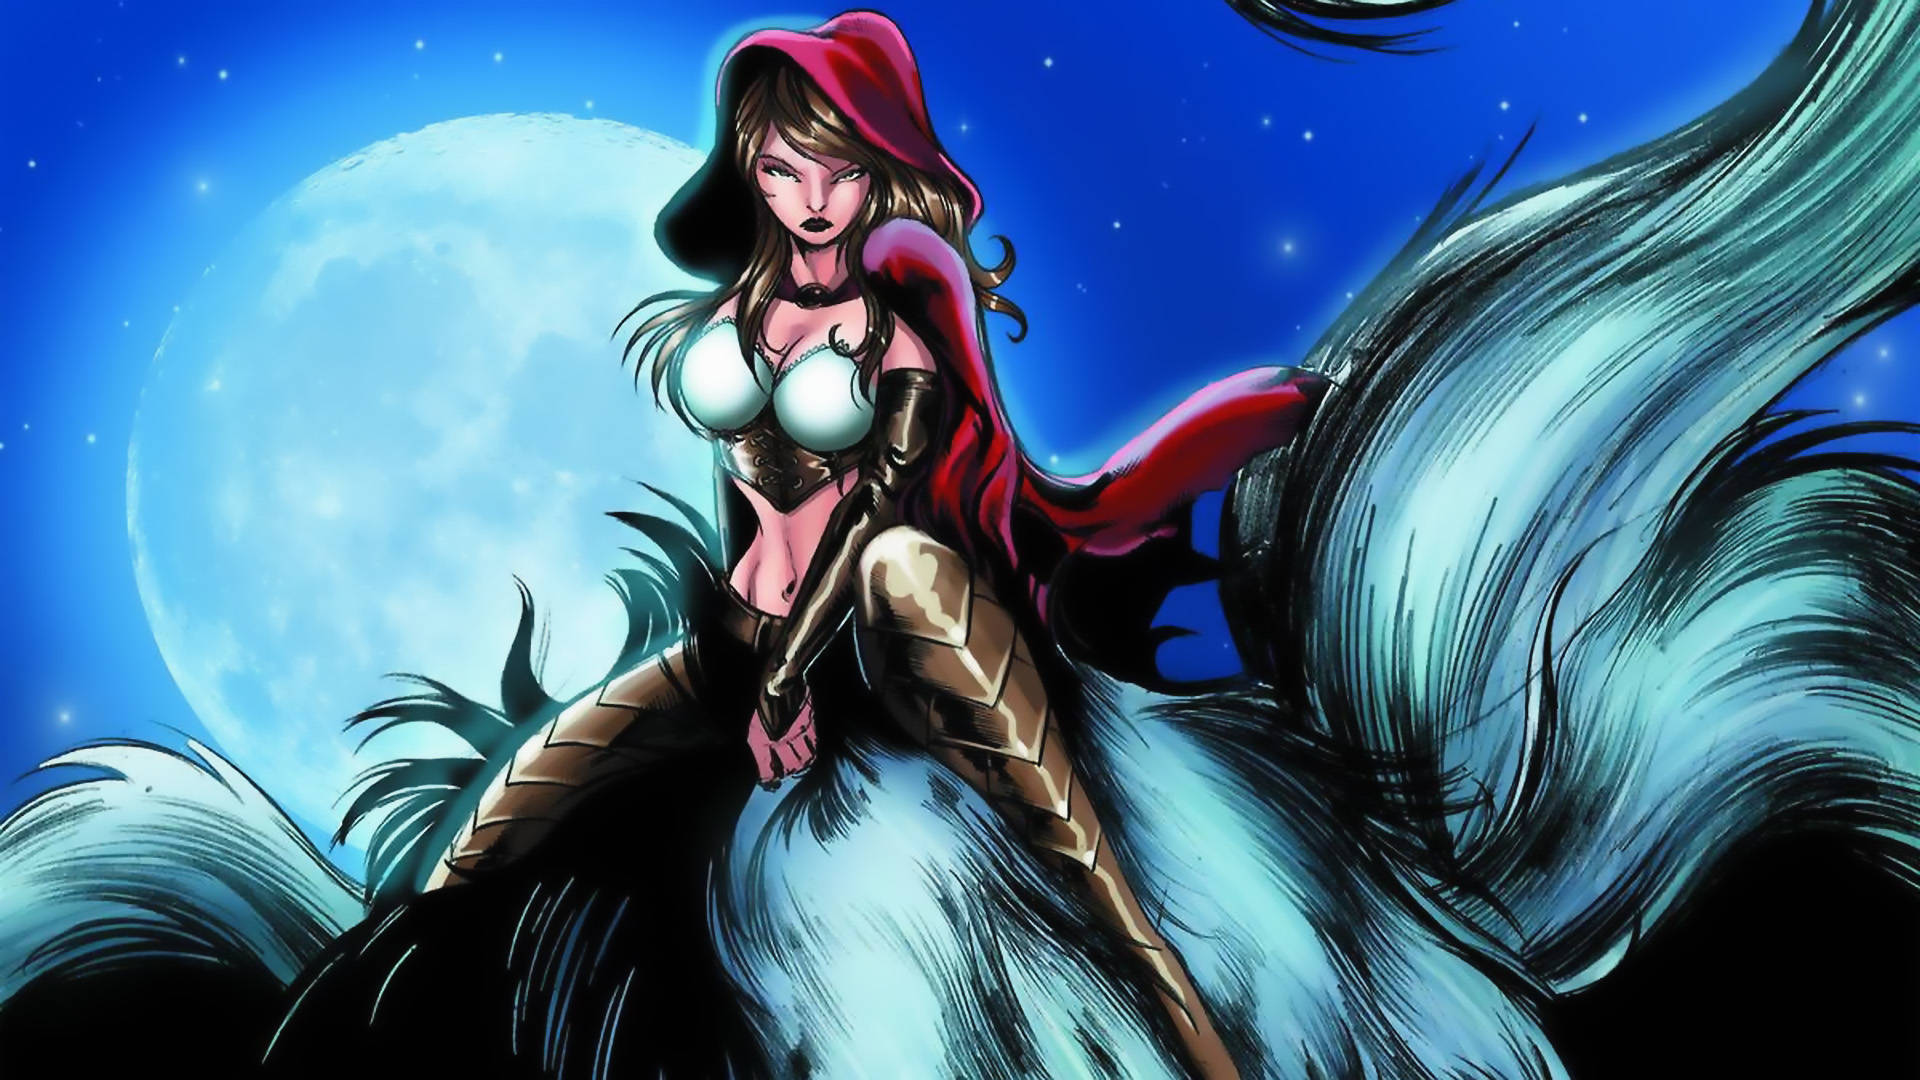 Bad Girl Grimm Fairy Tales